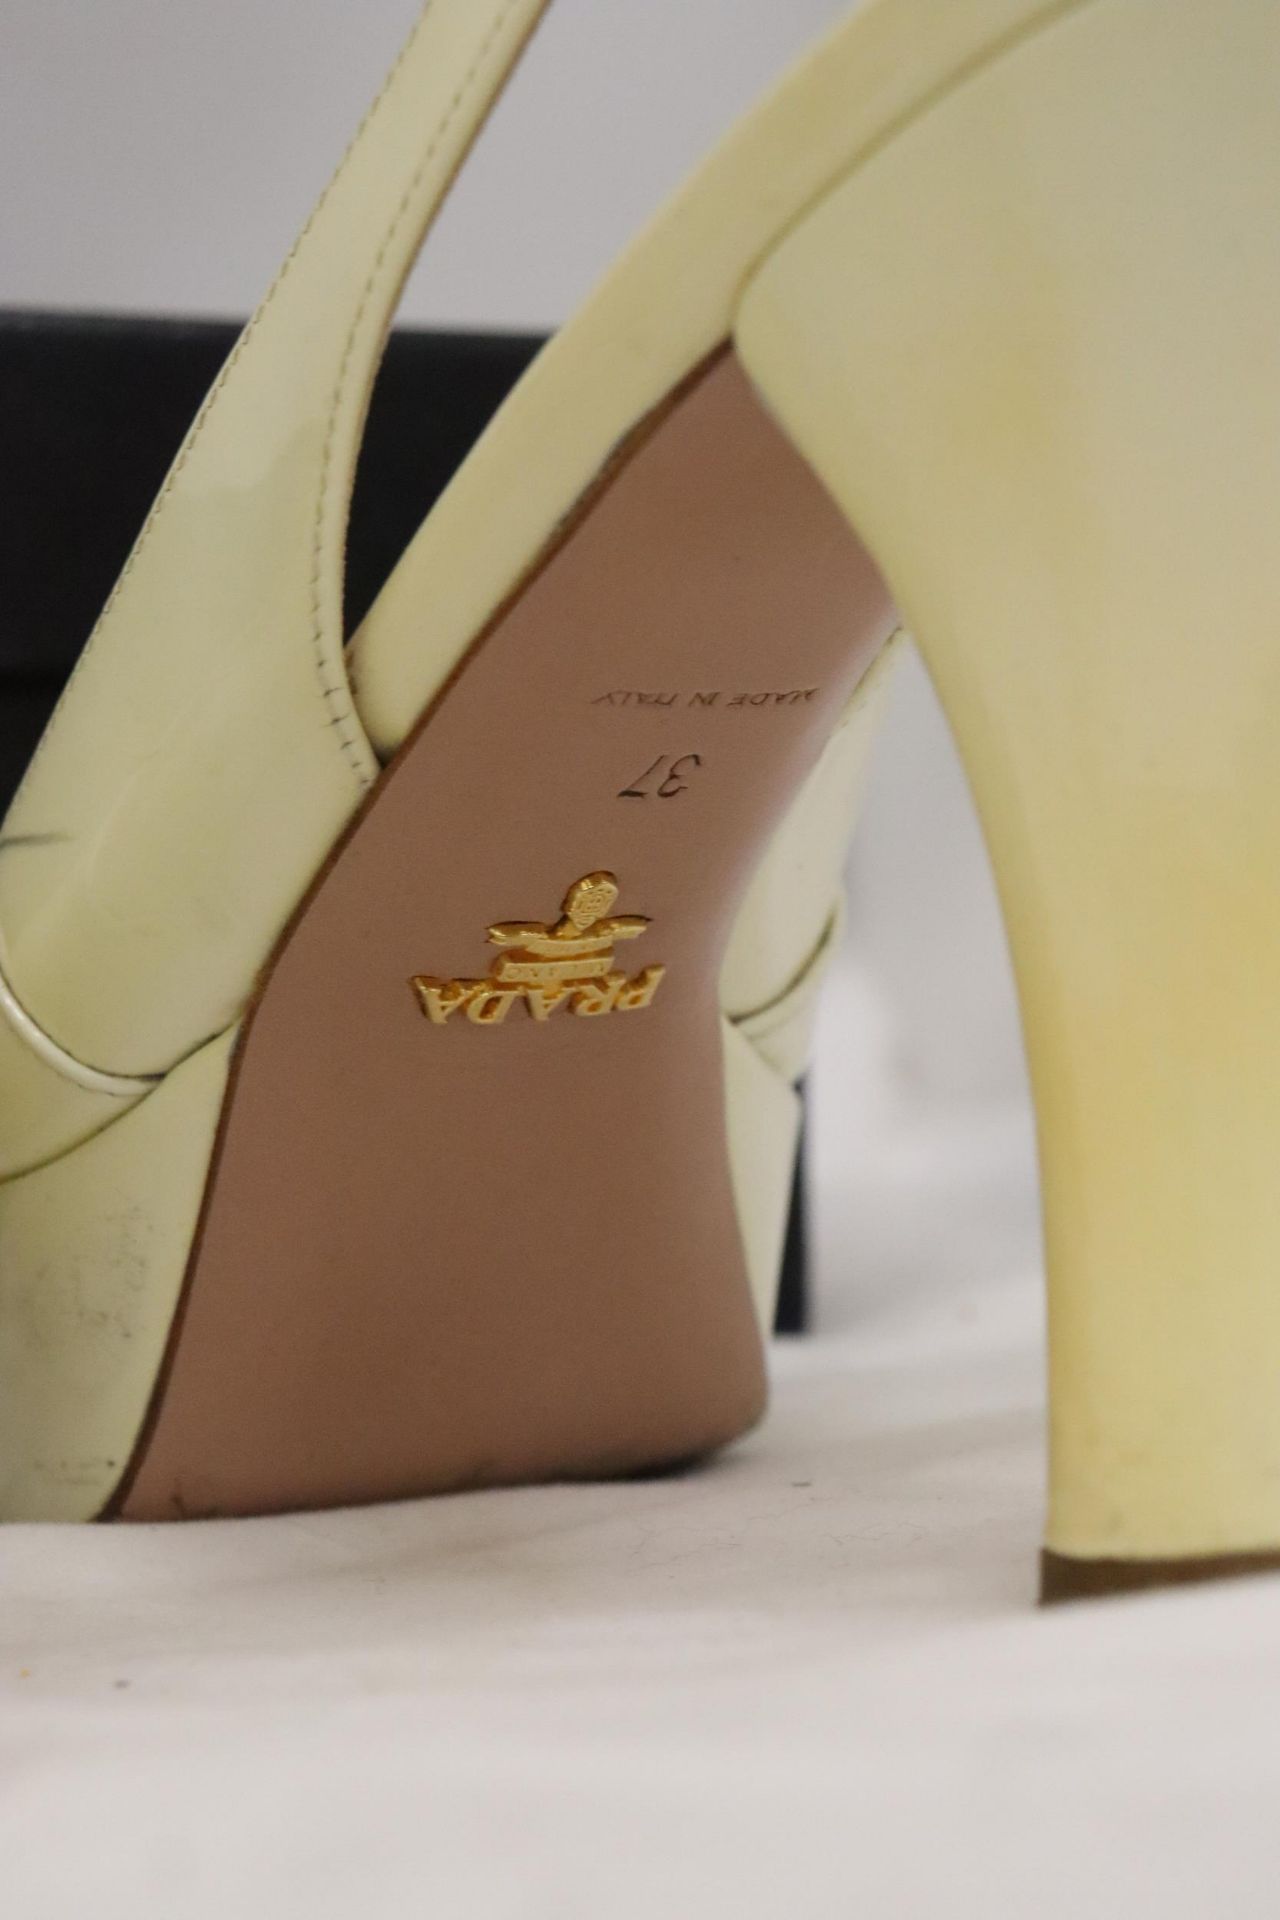 A PAIR OF CREAM HIGH HEELED SHOES, MARKED WITH A GOLD COLOURED 'PRADA' TO THE UNDERSIDE, IN A BOX - Image 5 of 7